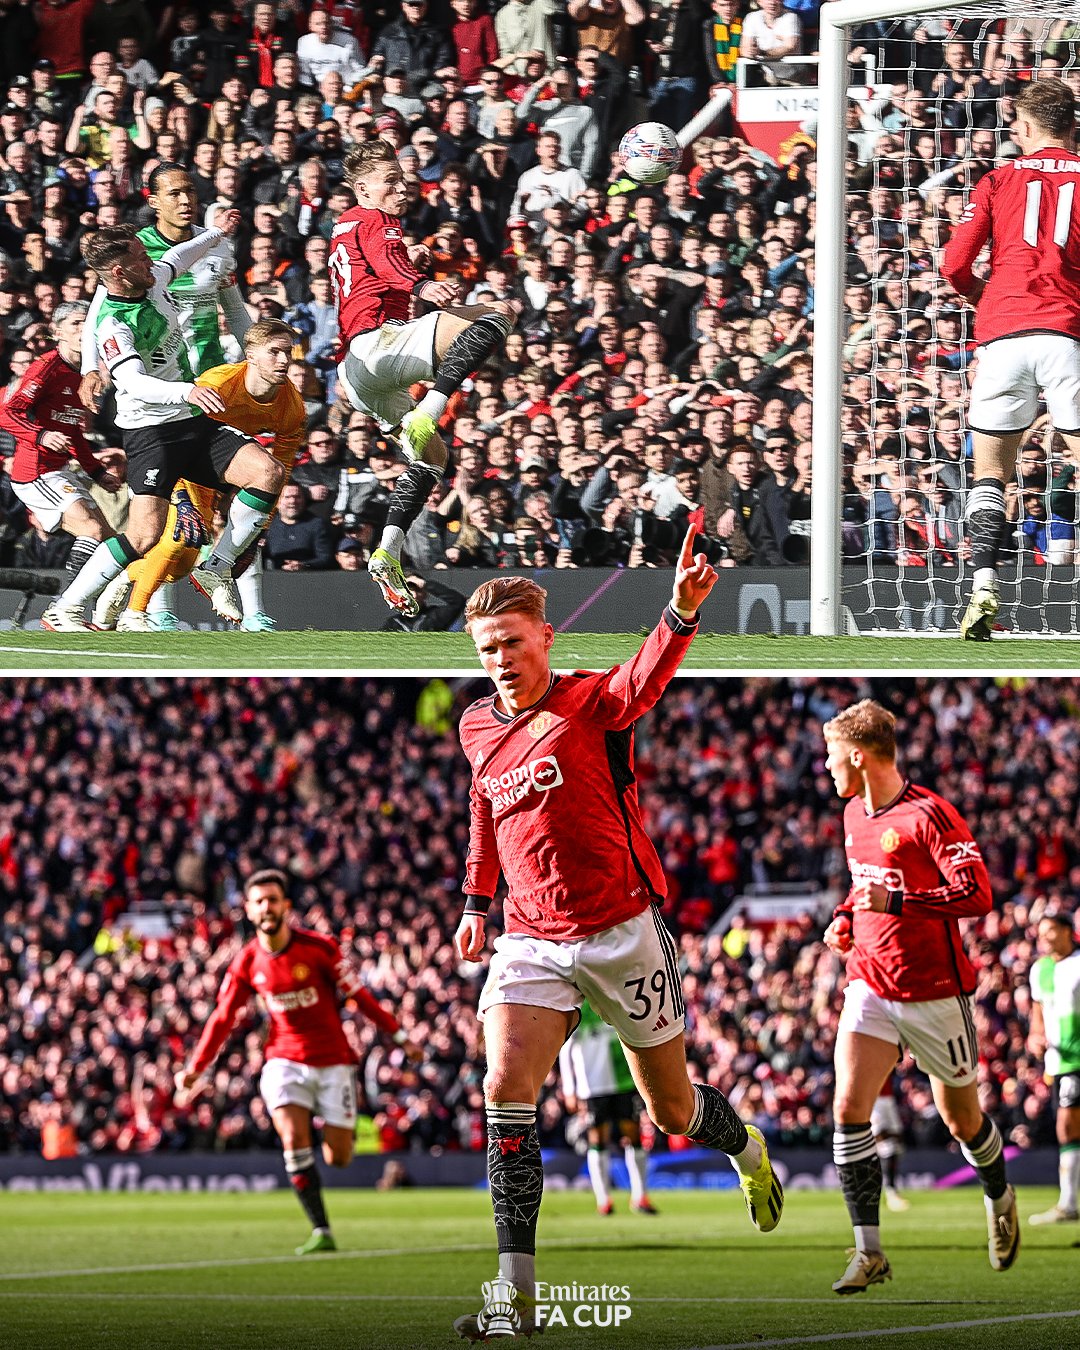 A split graphic. The top image is of Scott McTominay scoring for Manchester United, and the bottom image is of him celebrating the goal.